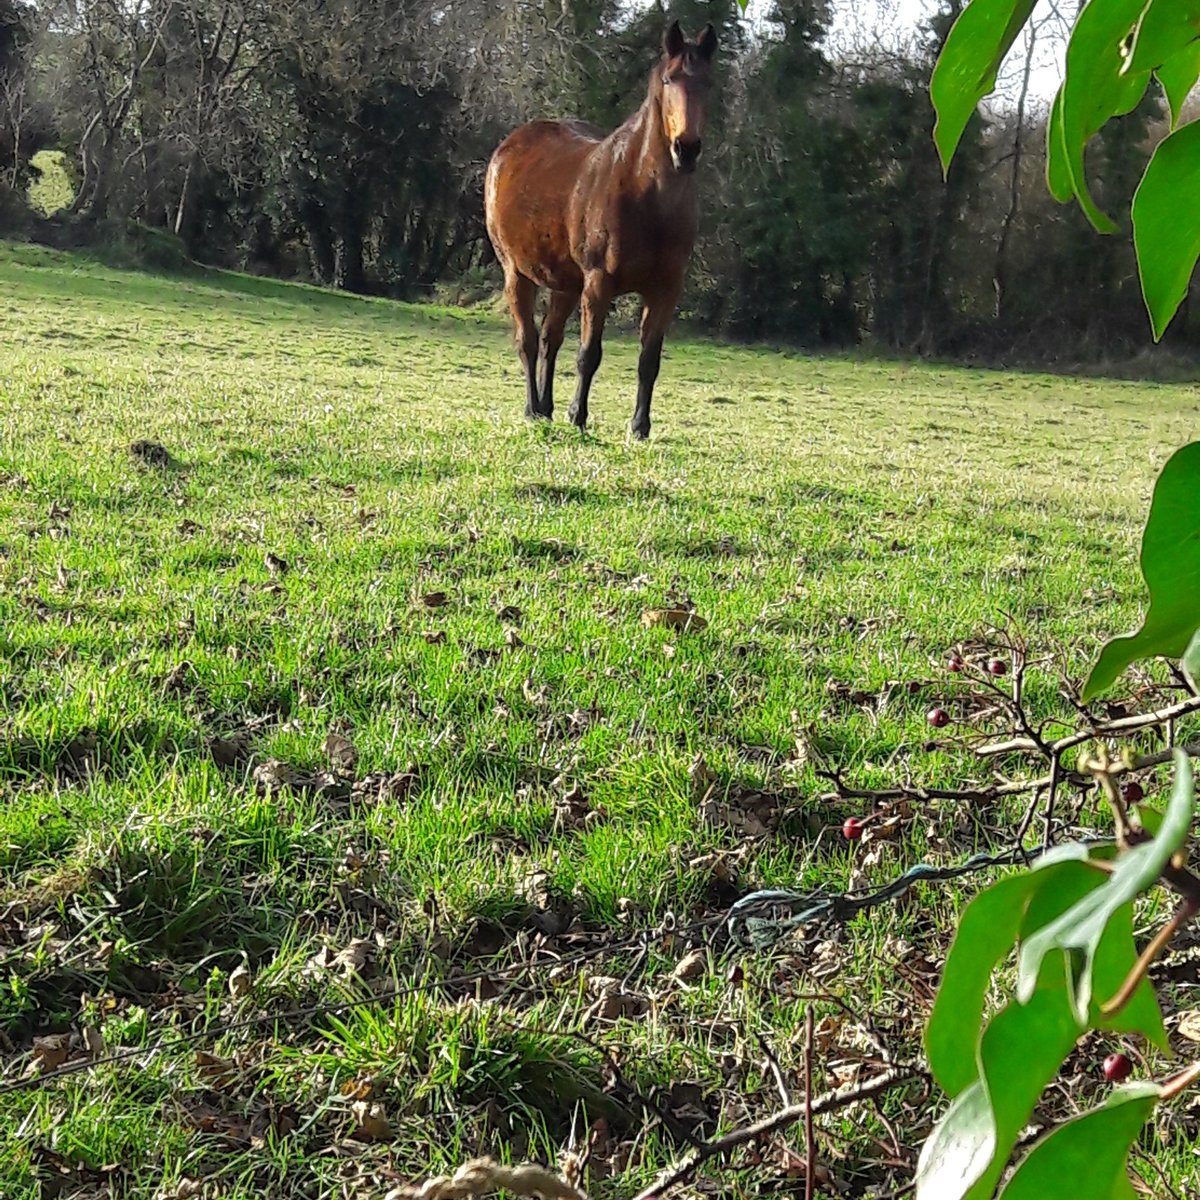 One of my nearest neighhhhbours😁 Not mine...I wish!
I adore living in the countryside and having the chance to be quite isolated from 'life' is such therapy for me. You couldn't by it.
#Proud_Culchie_ #countrylife #irishcountryside #equinebeauty
#irishcountrytherapy